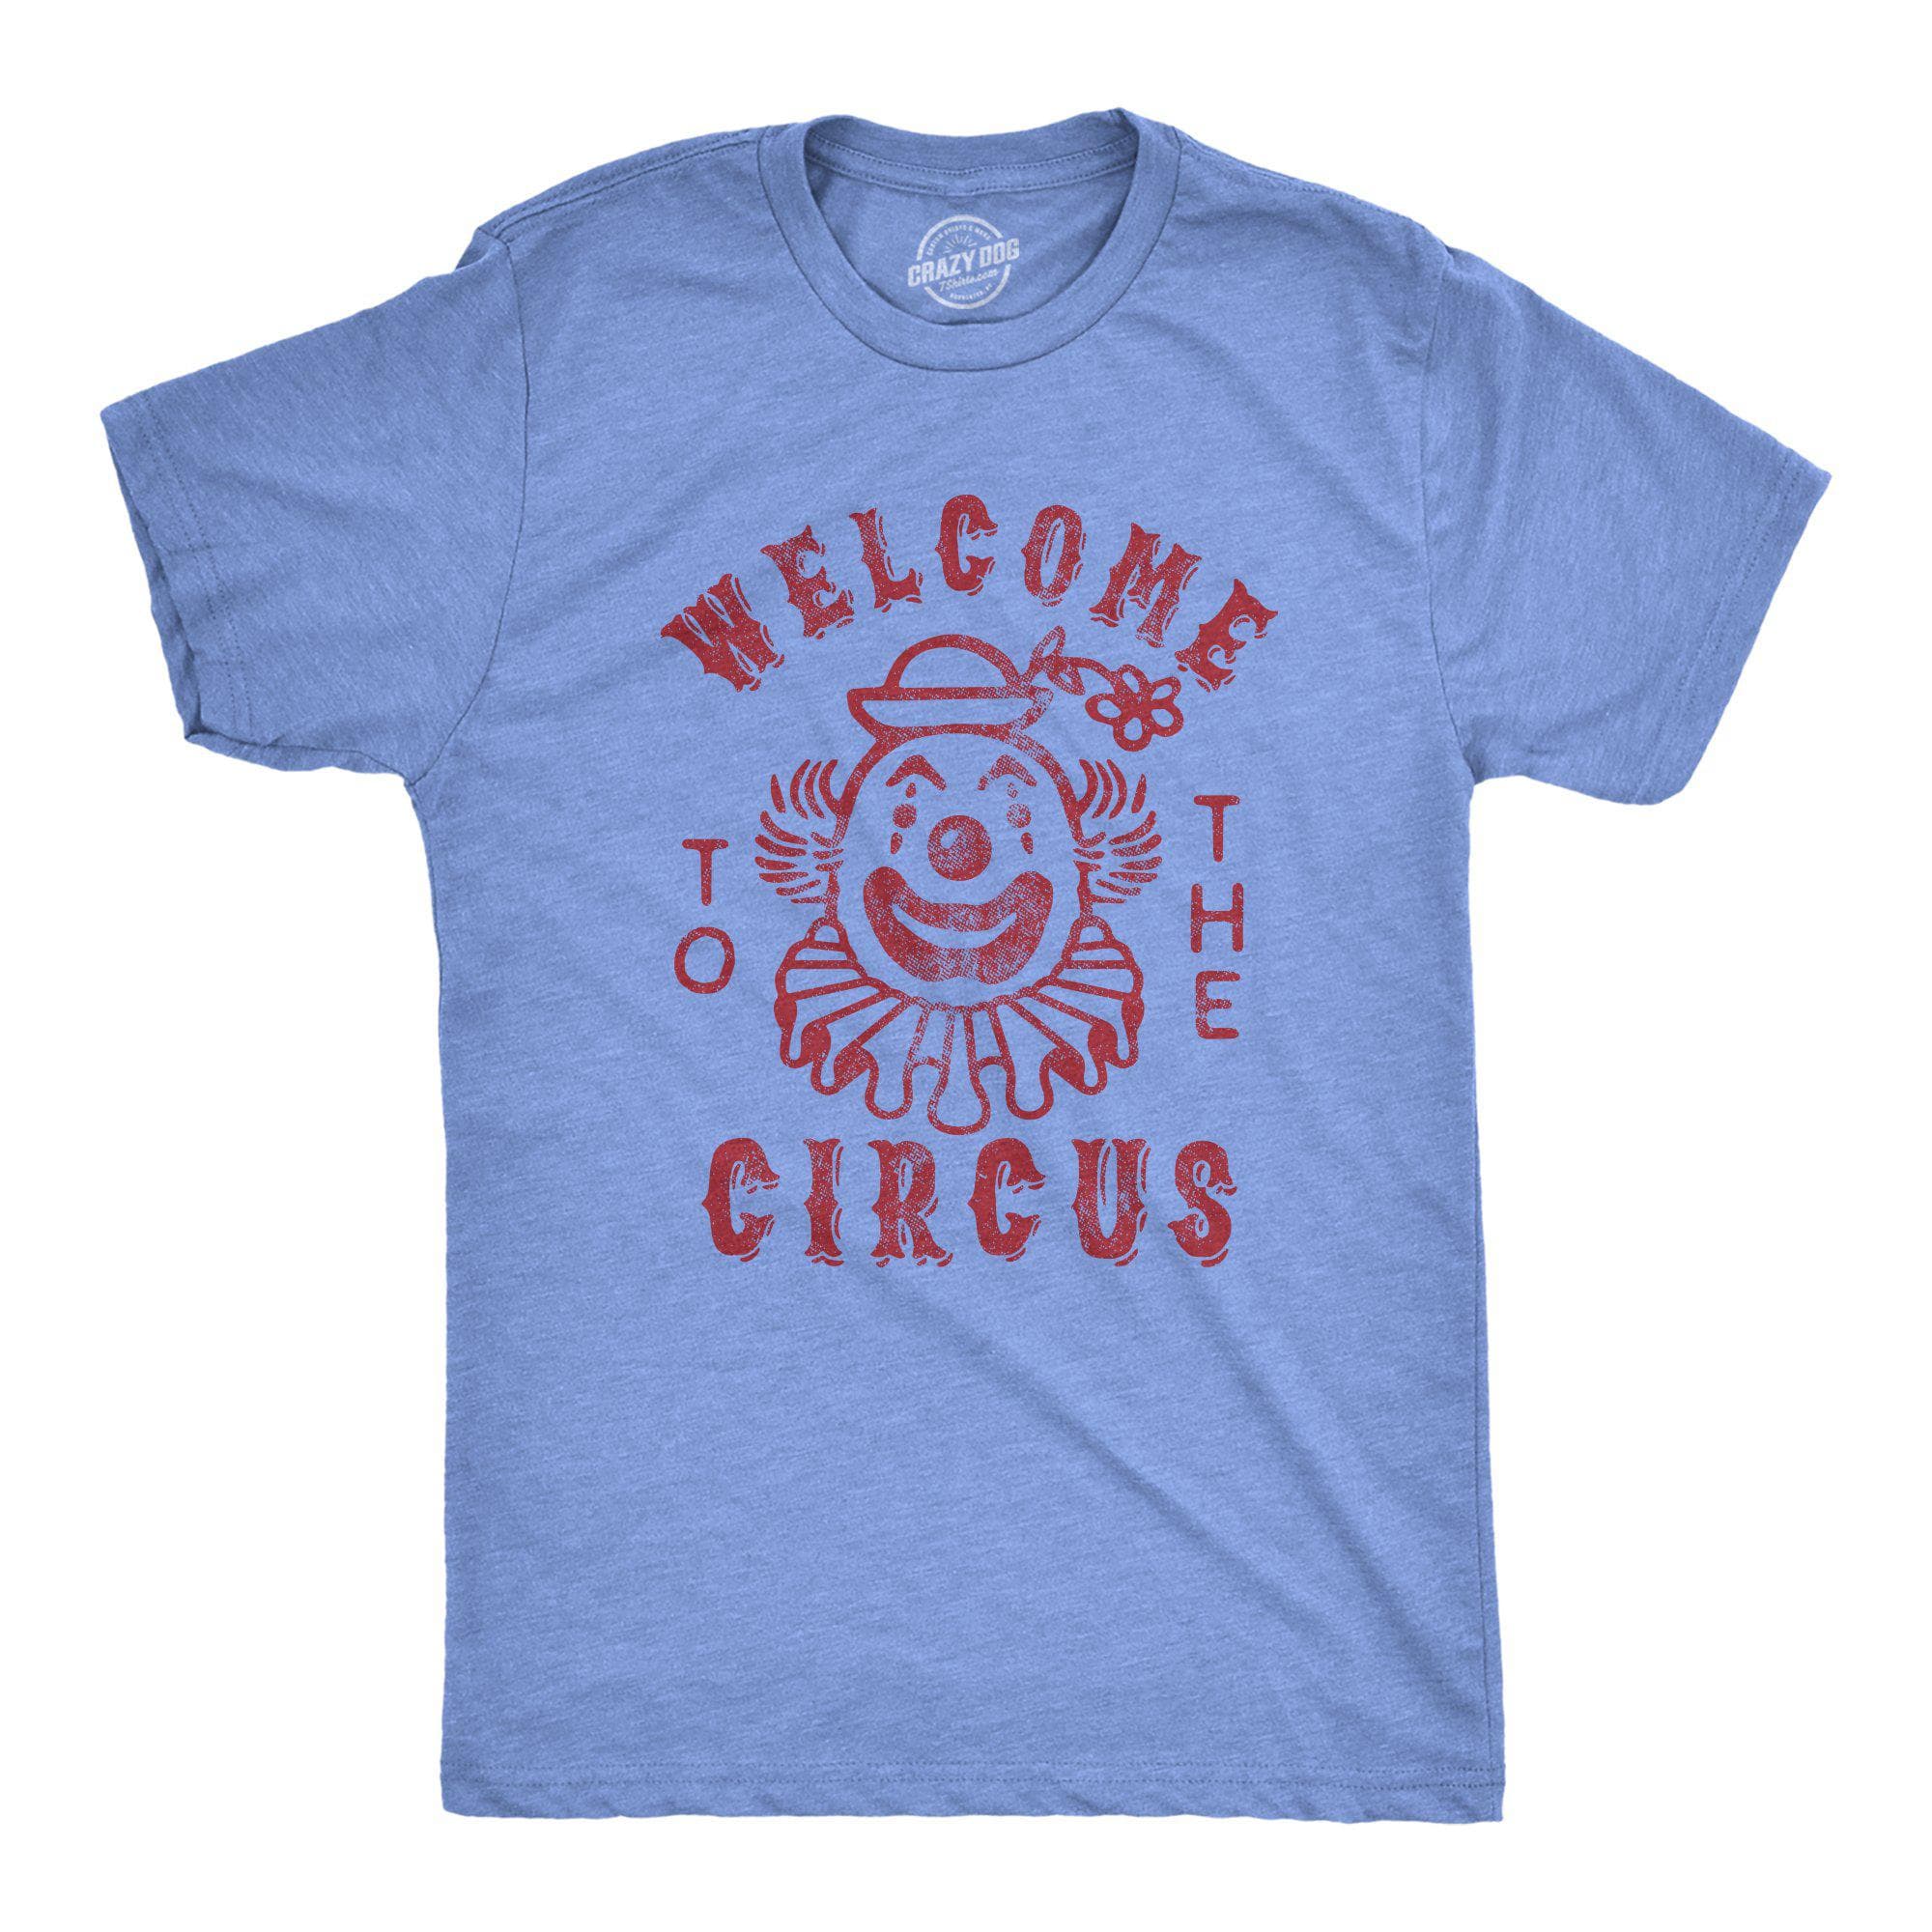 Welcome To The Circus Men's Tshirt - Crazy Dog T-Shirts